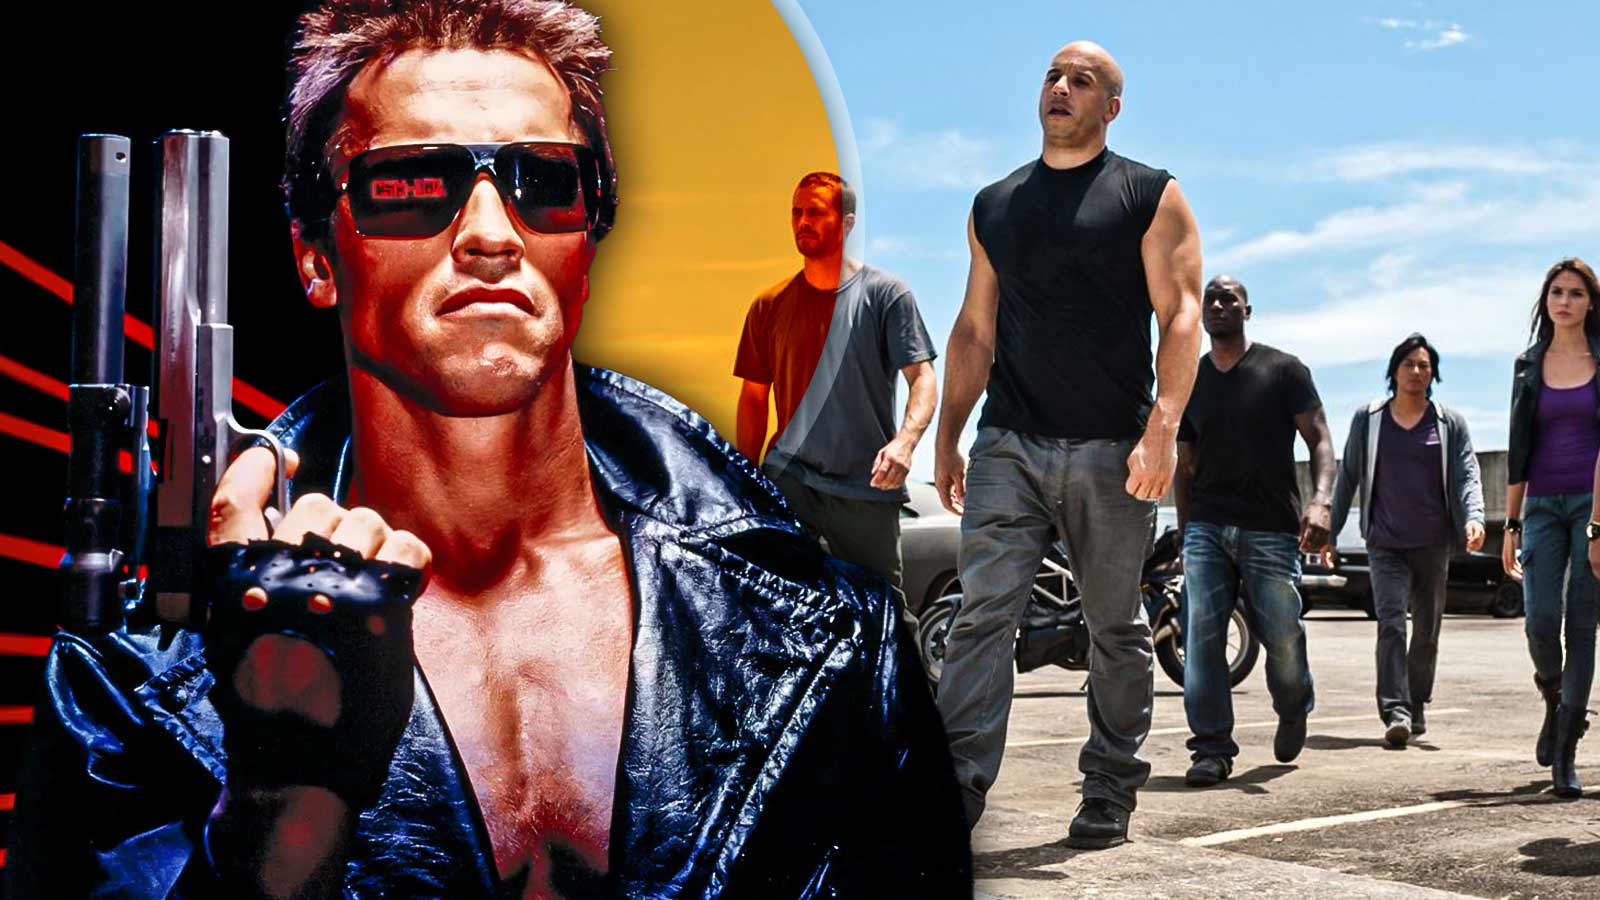 ‘The Terminator’ Star’s Obscure 1980s Film Has More in Common With ‘Fast & Furious’ Than the Greatest Stunt of the Franchise